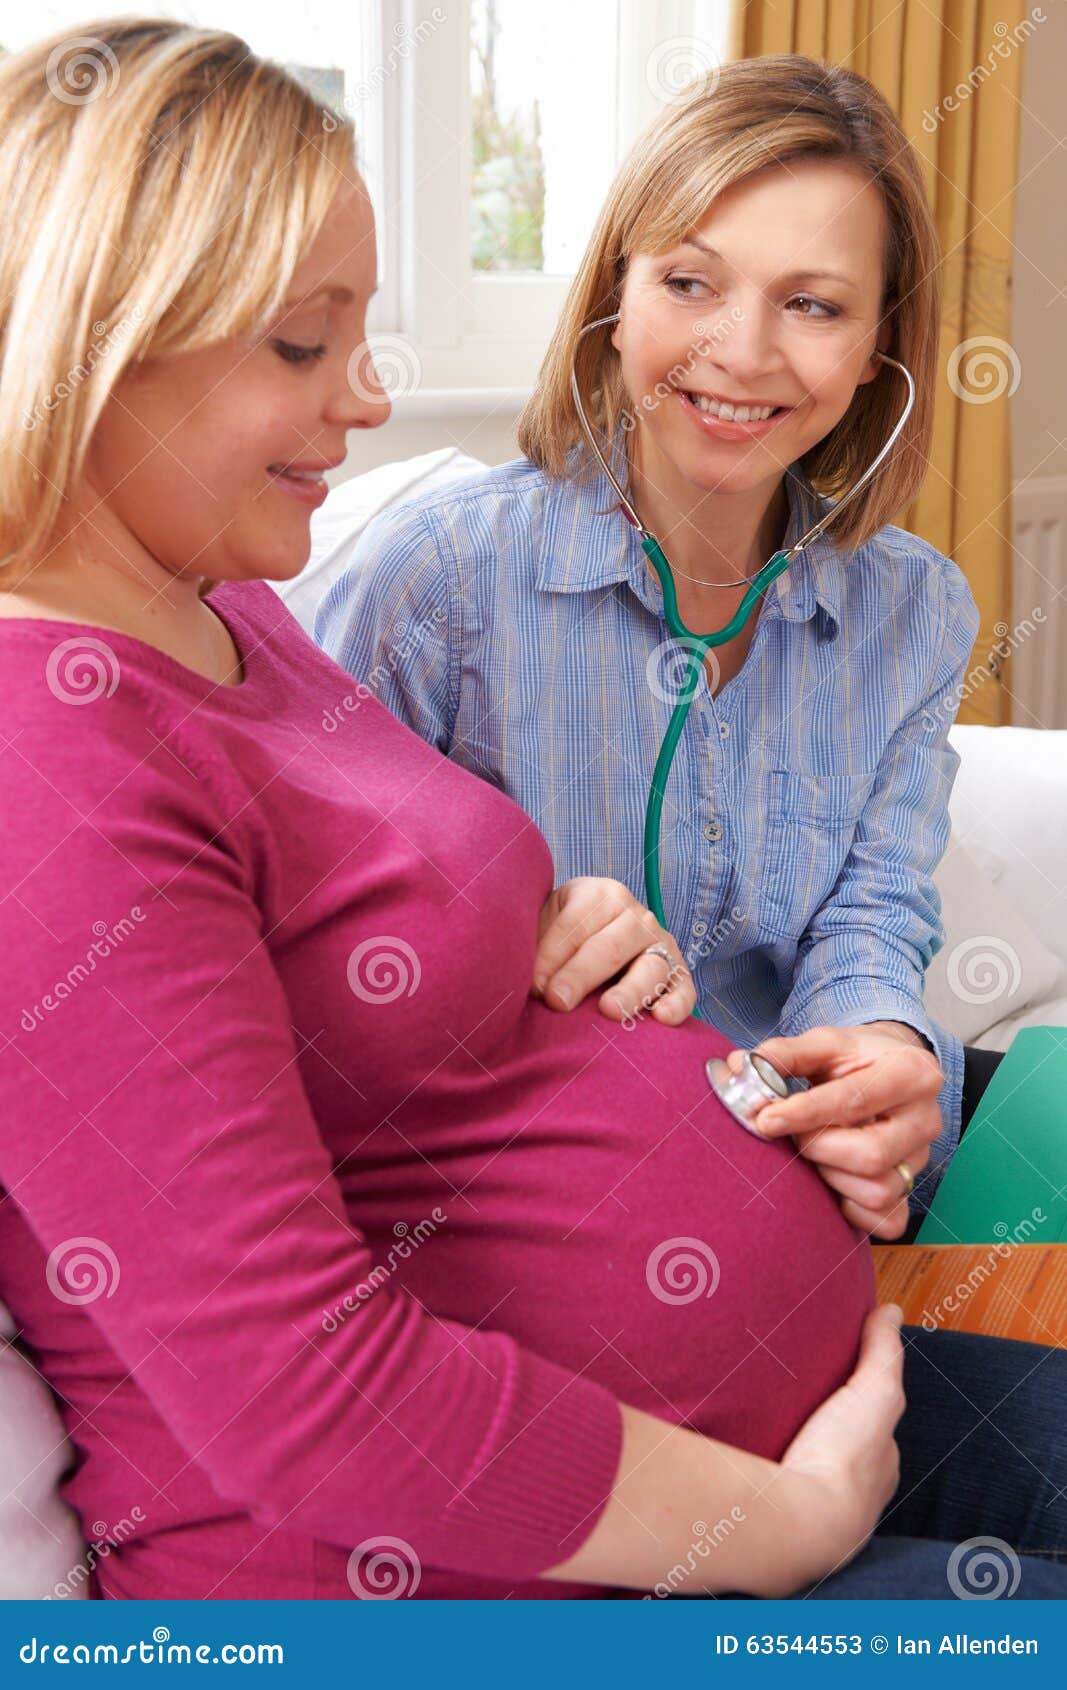 midwife home visit